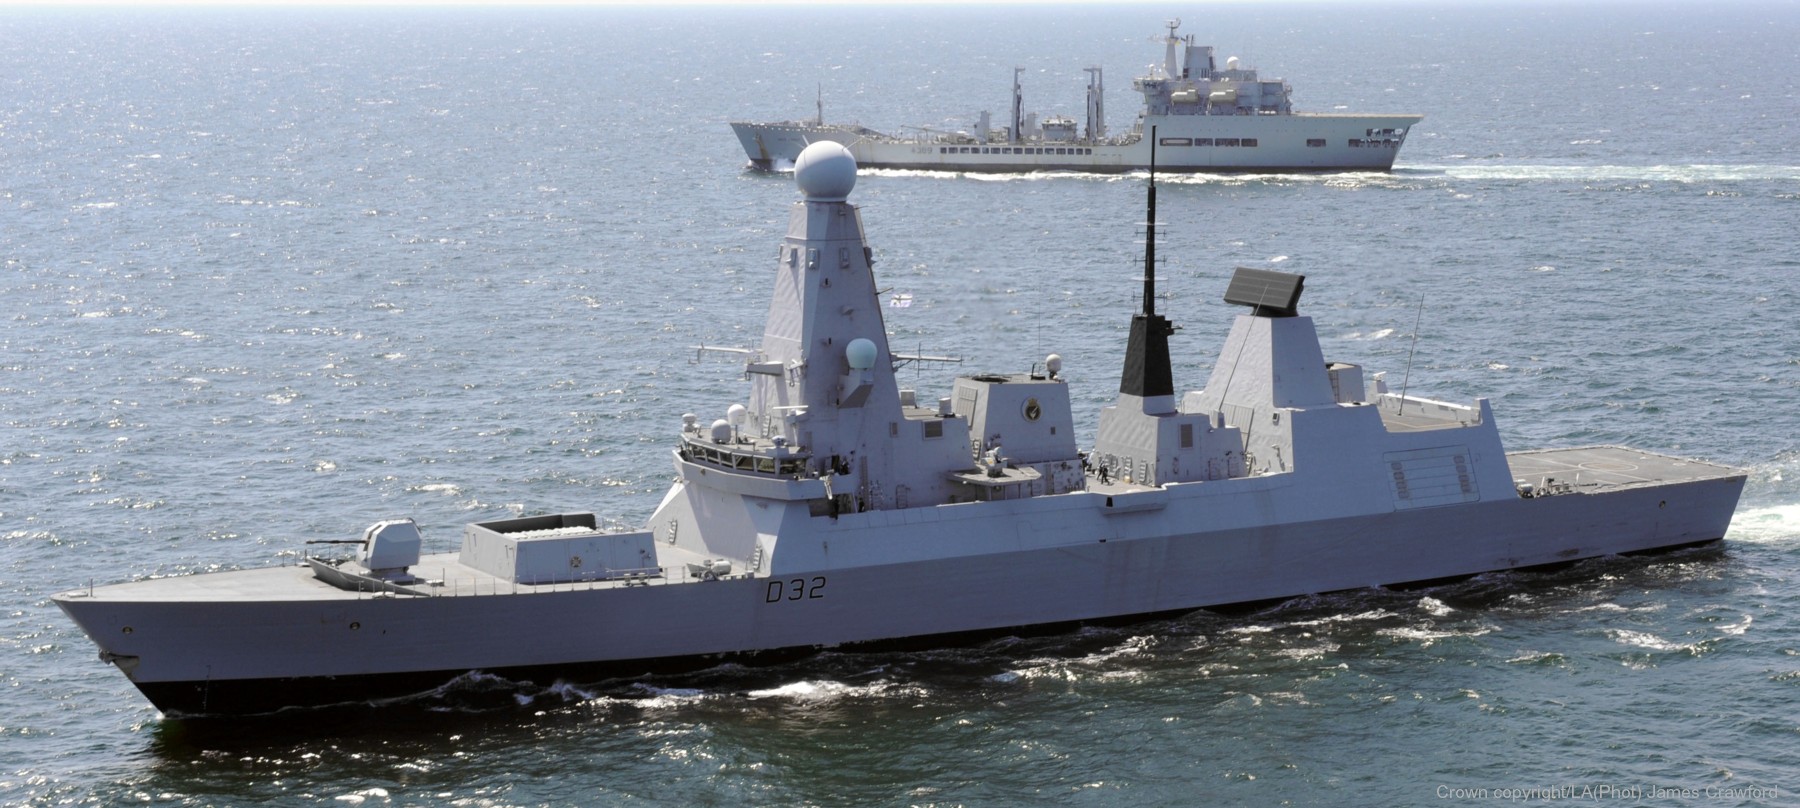 hms daring d-32 type 45 class guided missile destroyer royal navy sea viper paams 33